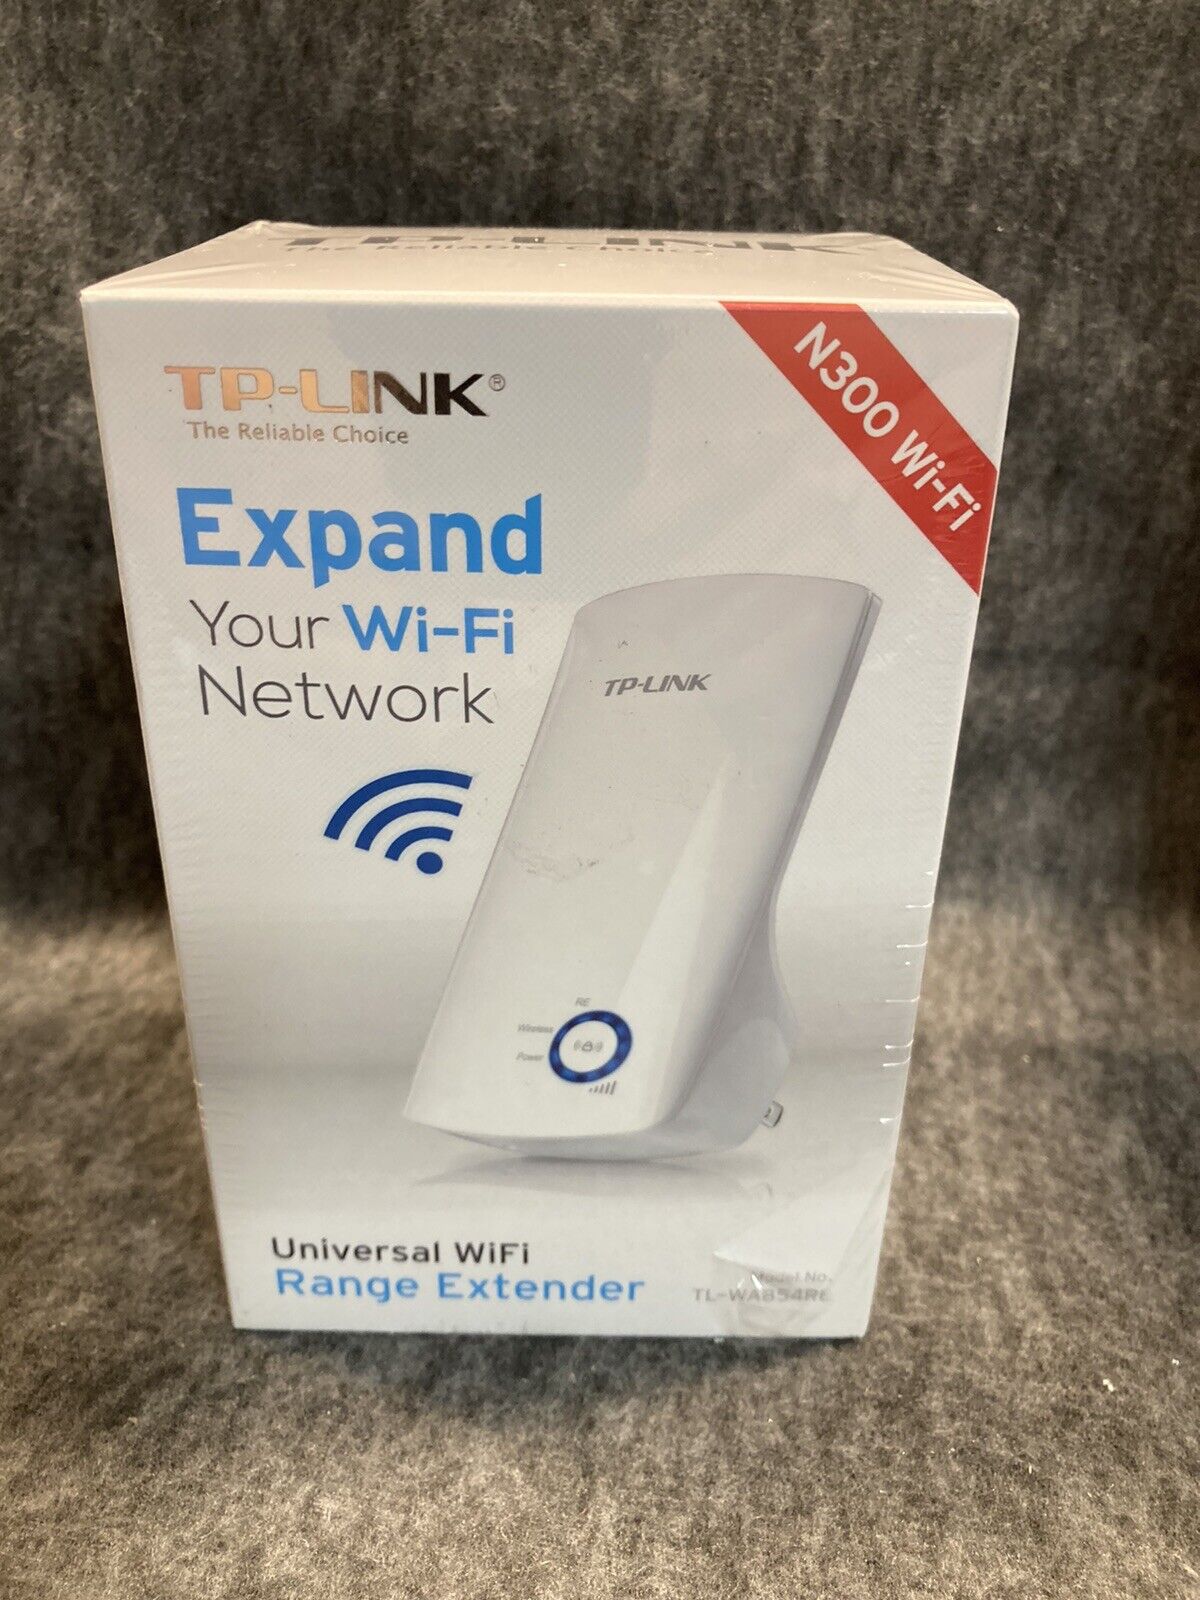 TP-Link, Expand Your Wi-Fi Network, Universal Range Extender: TL~WA854RE ~NEW